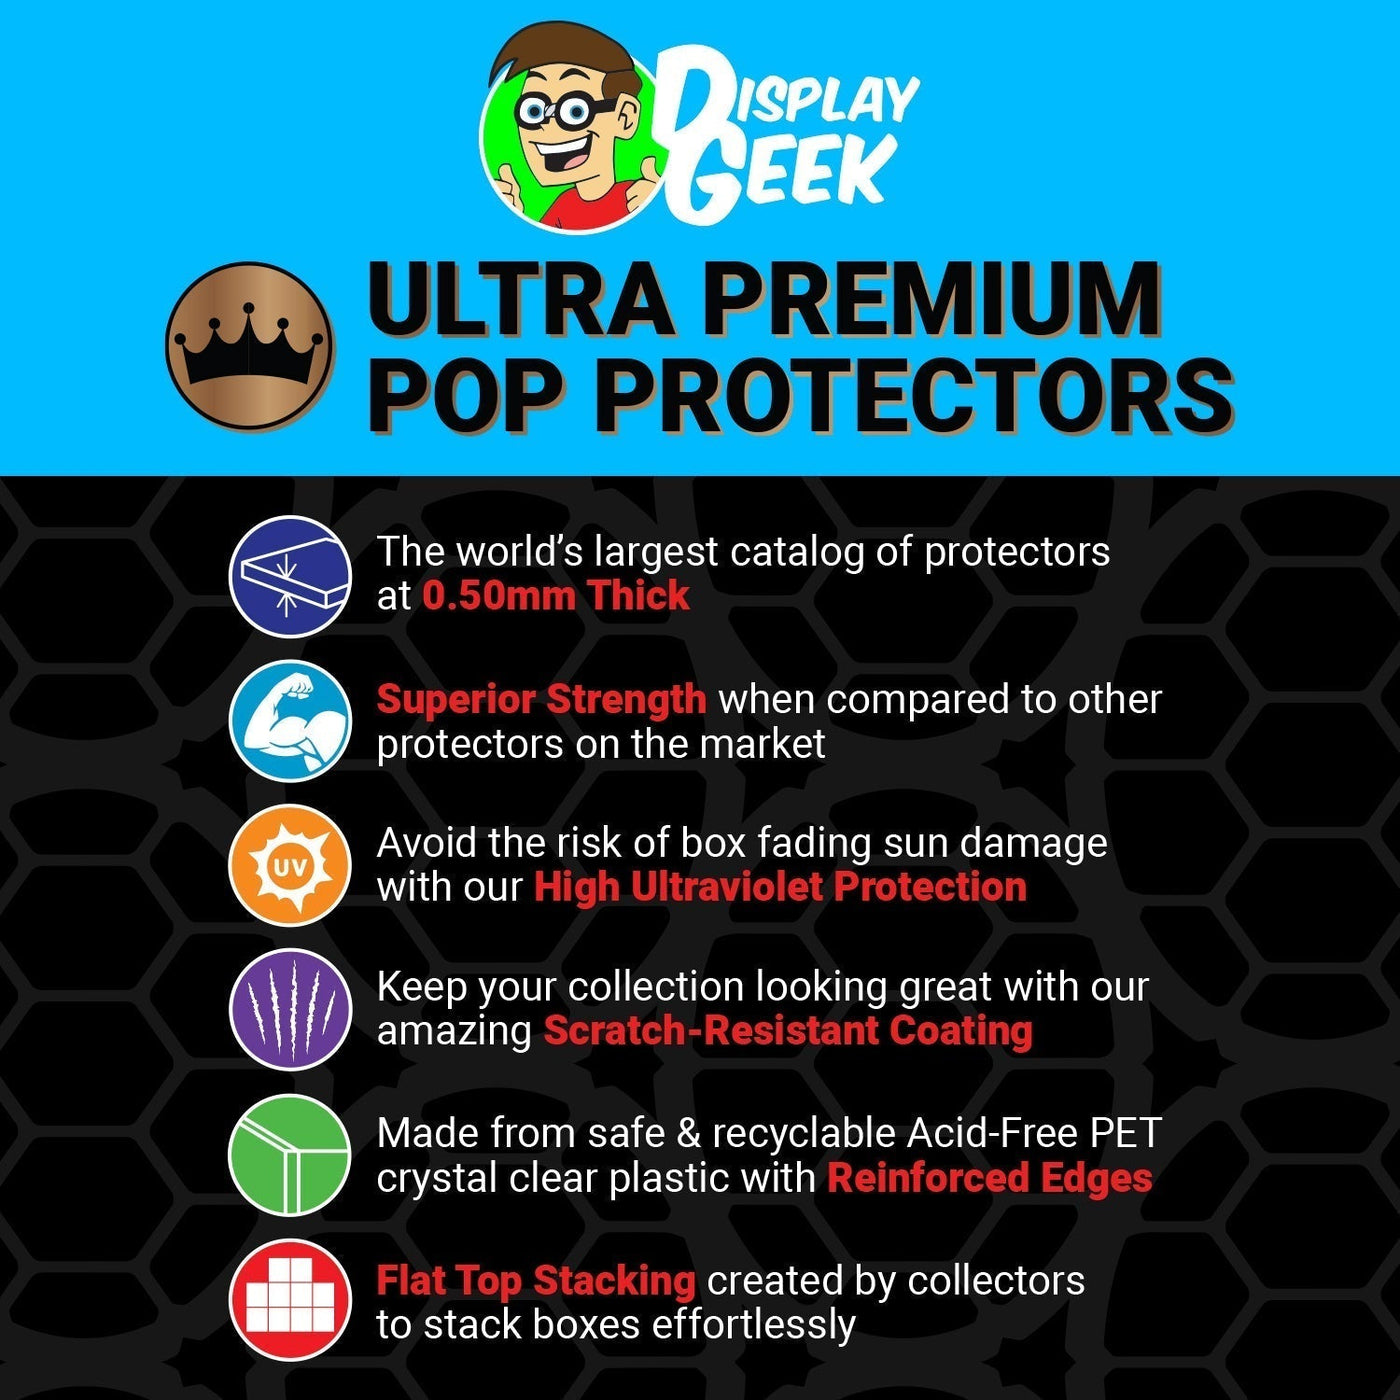 Pop Protector for Mega Man FunkO's Cereal Box on The Protector Guide App by Display Geek